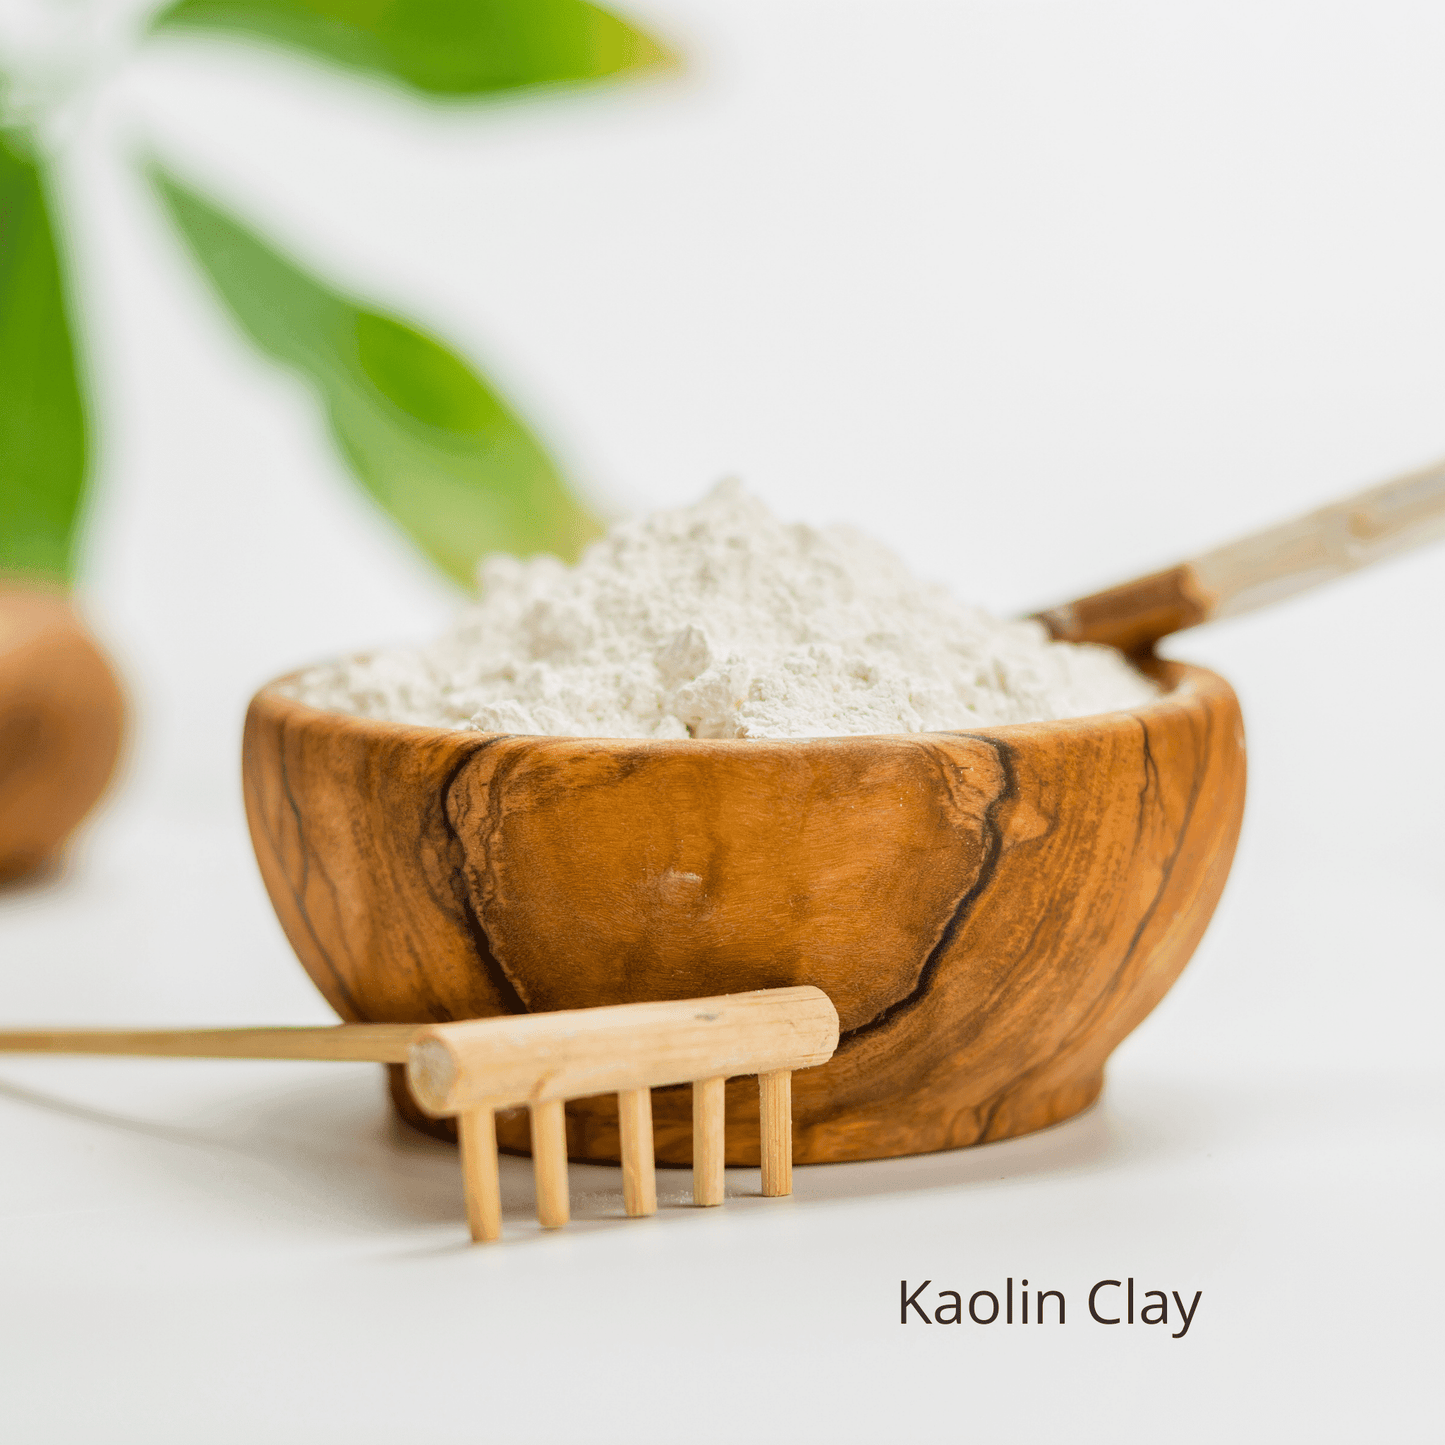 Be Green Bath and Body Dry Cleansing Grains contains kaolin clay